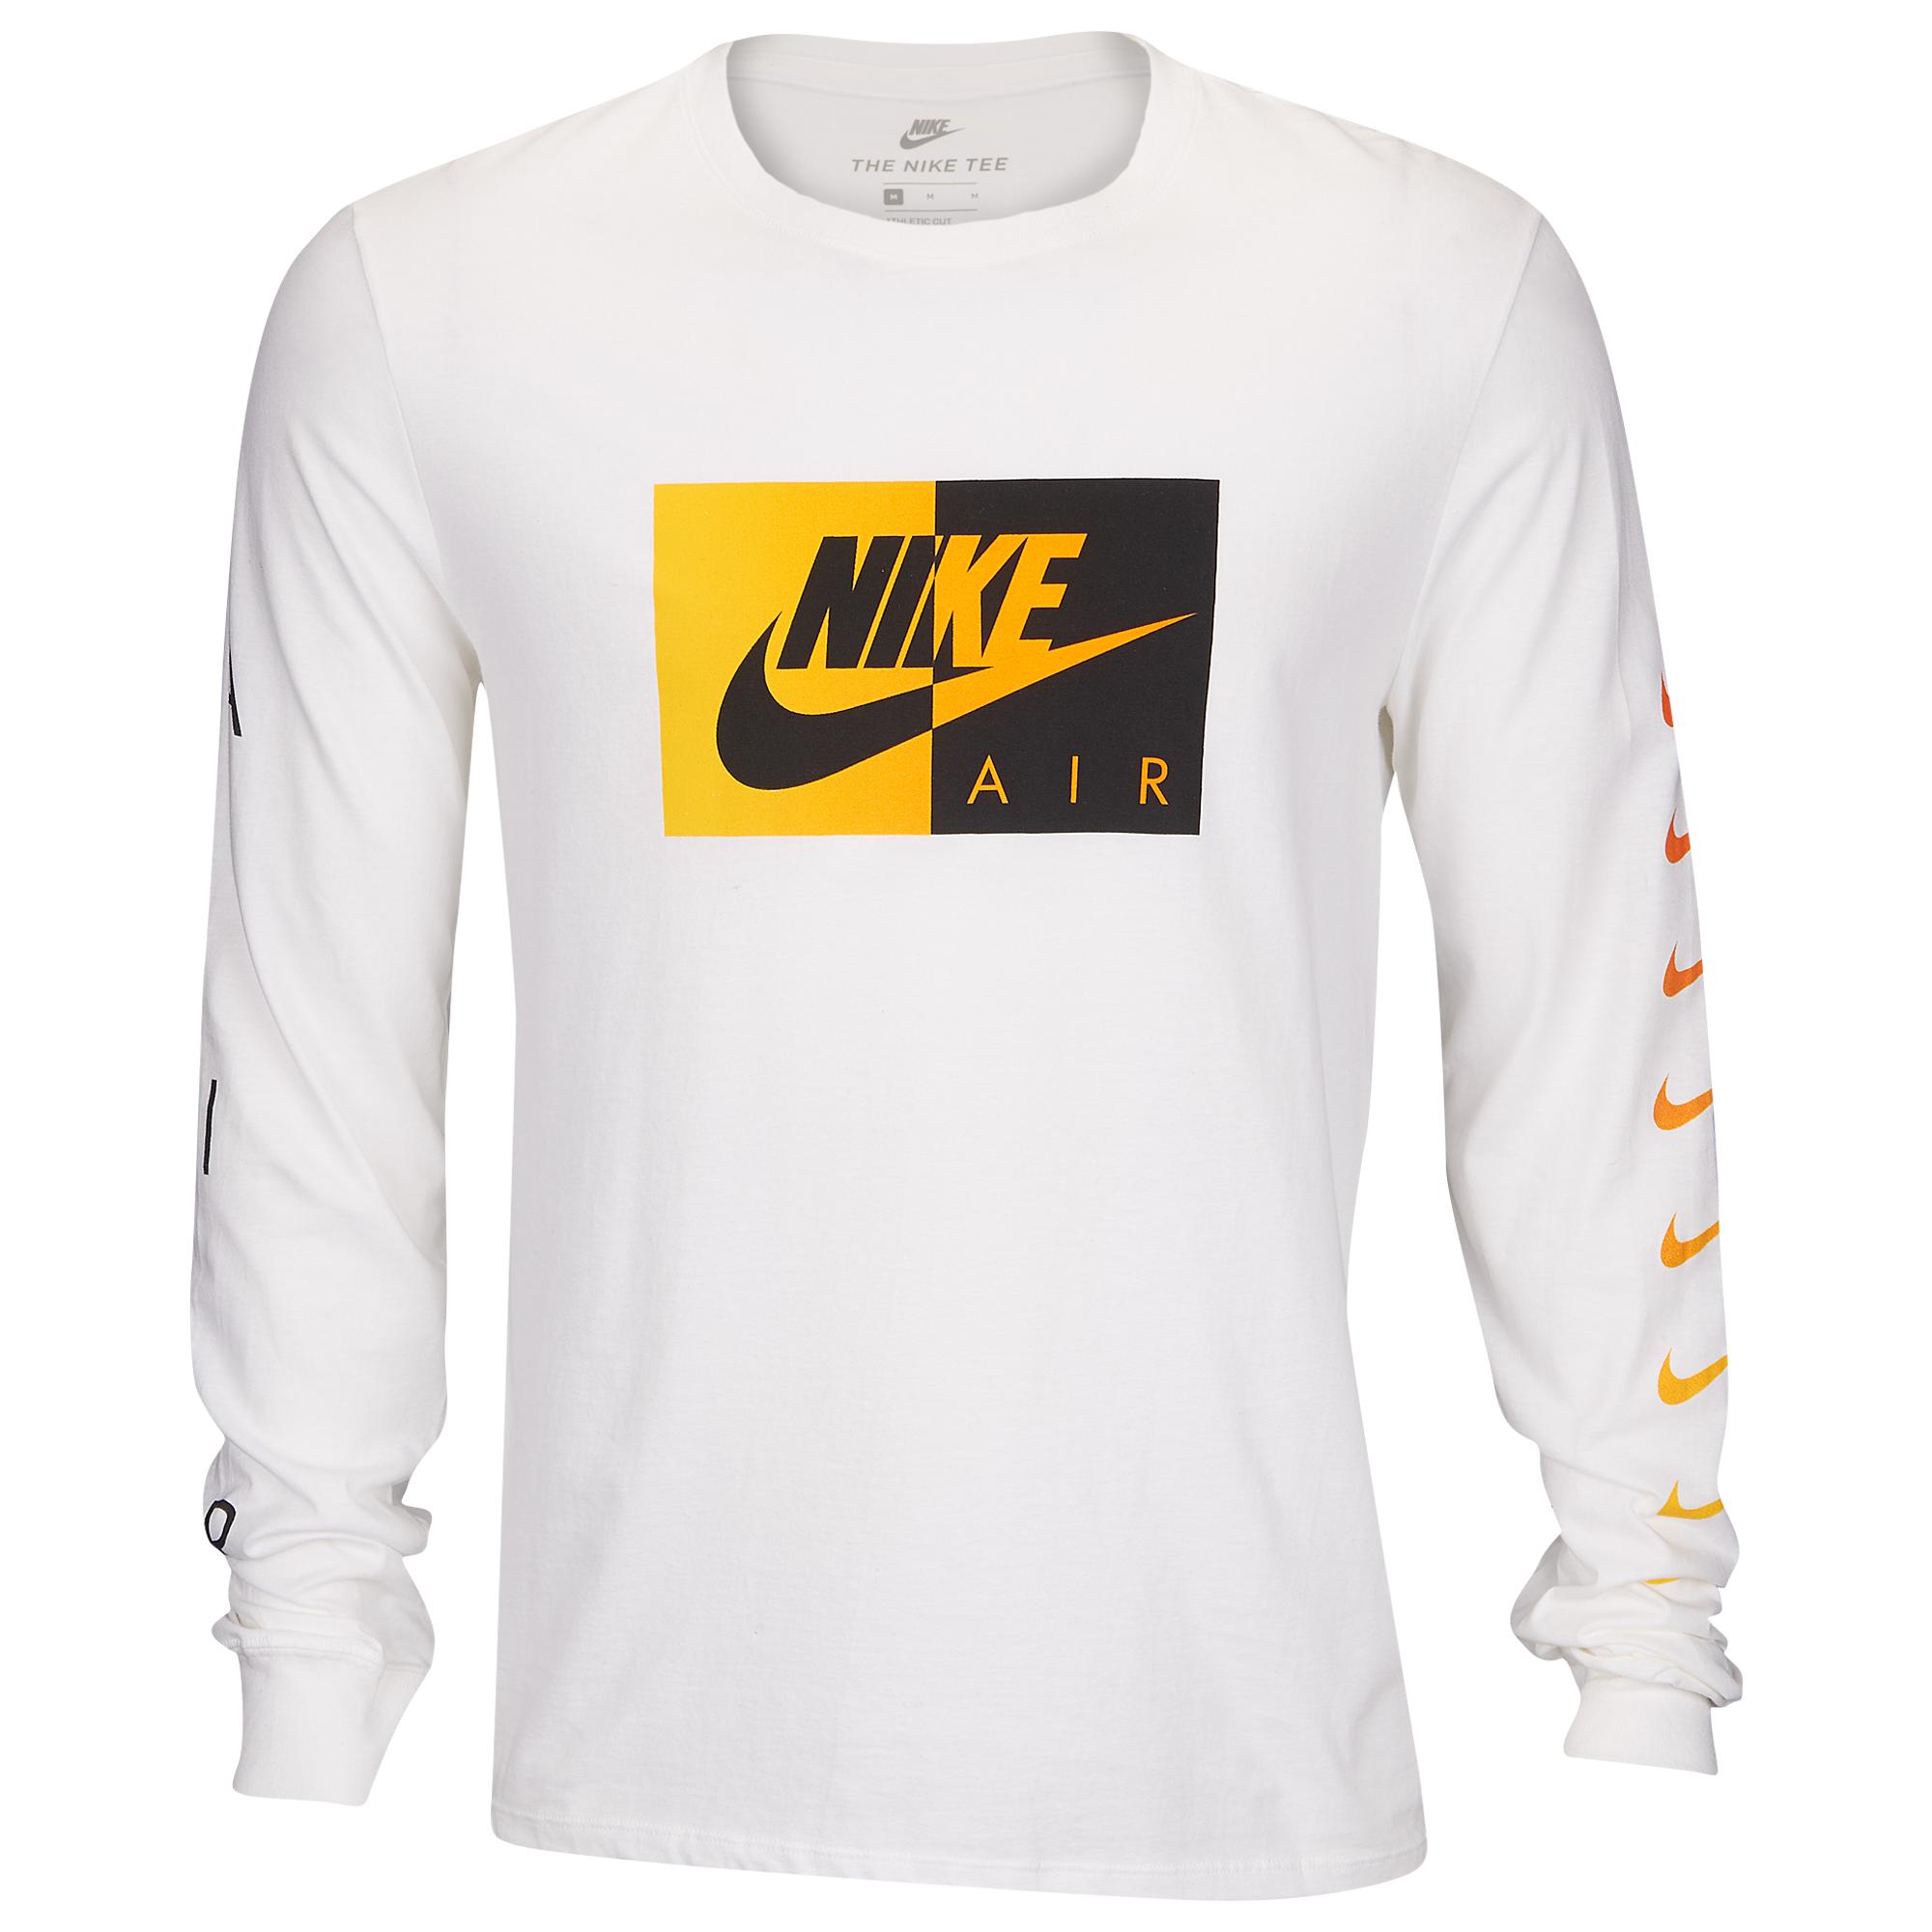 Nike Graphic Long Sleeve T-shirt in White for Men - Lyst